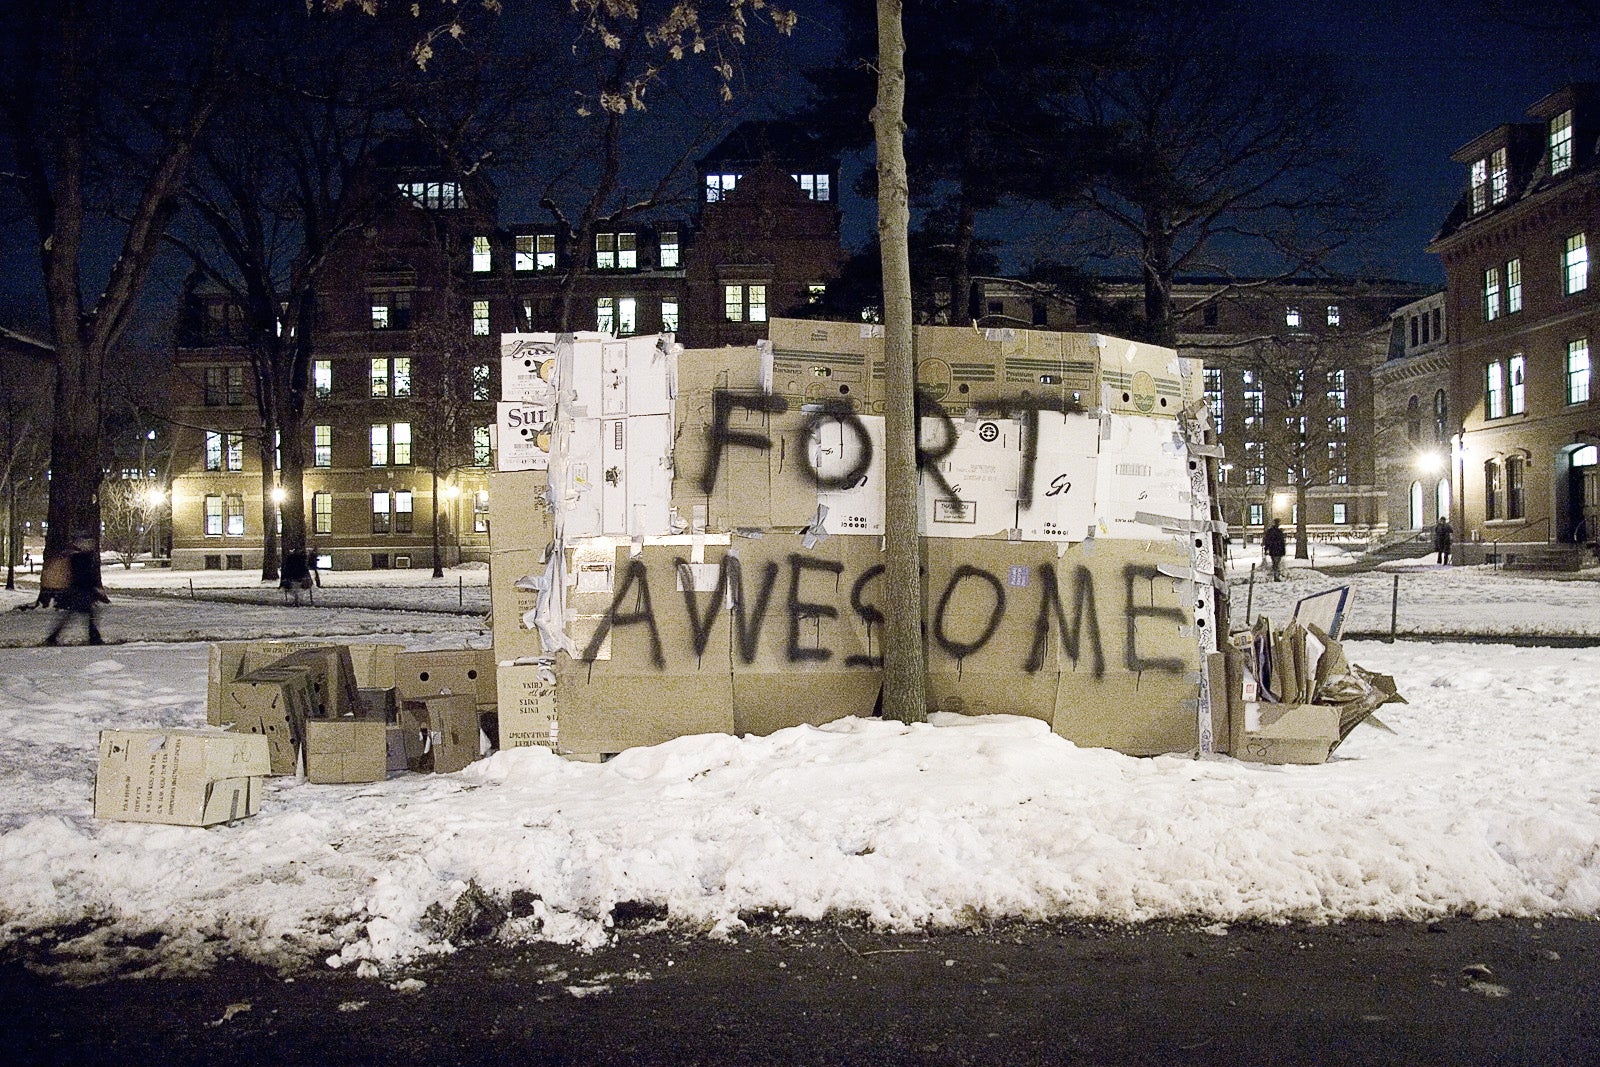 fort-awesome.jpg